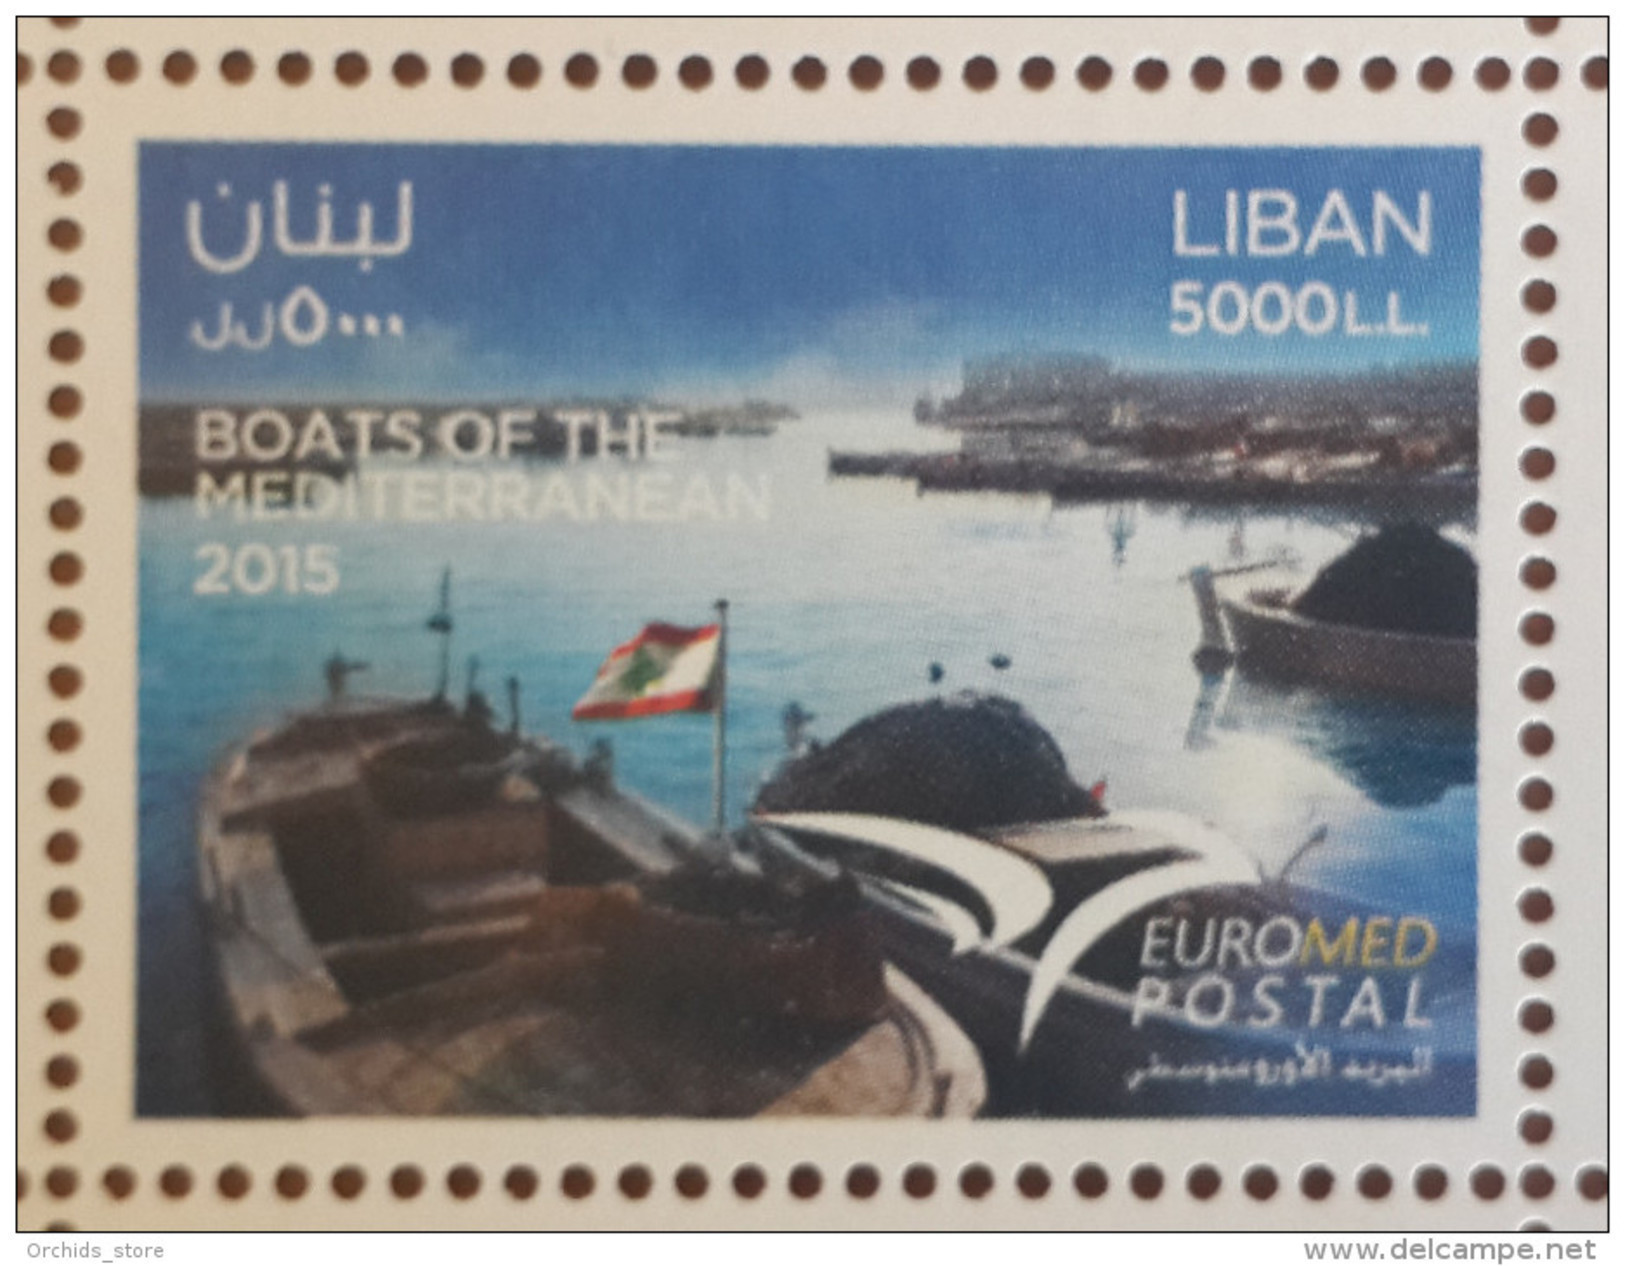 Lebanon 2015 New Stamp MNH - Postal Union For The Mediterrannean - Joint Issue - Euromed - Boats Of The Mediterrannean - Lebanon